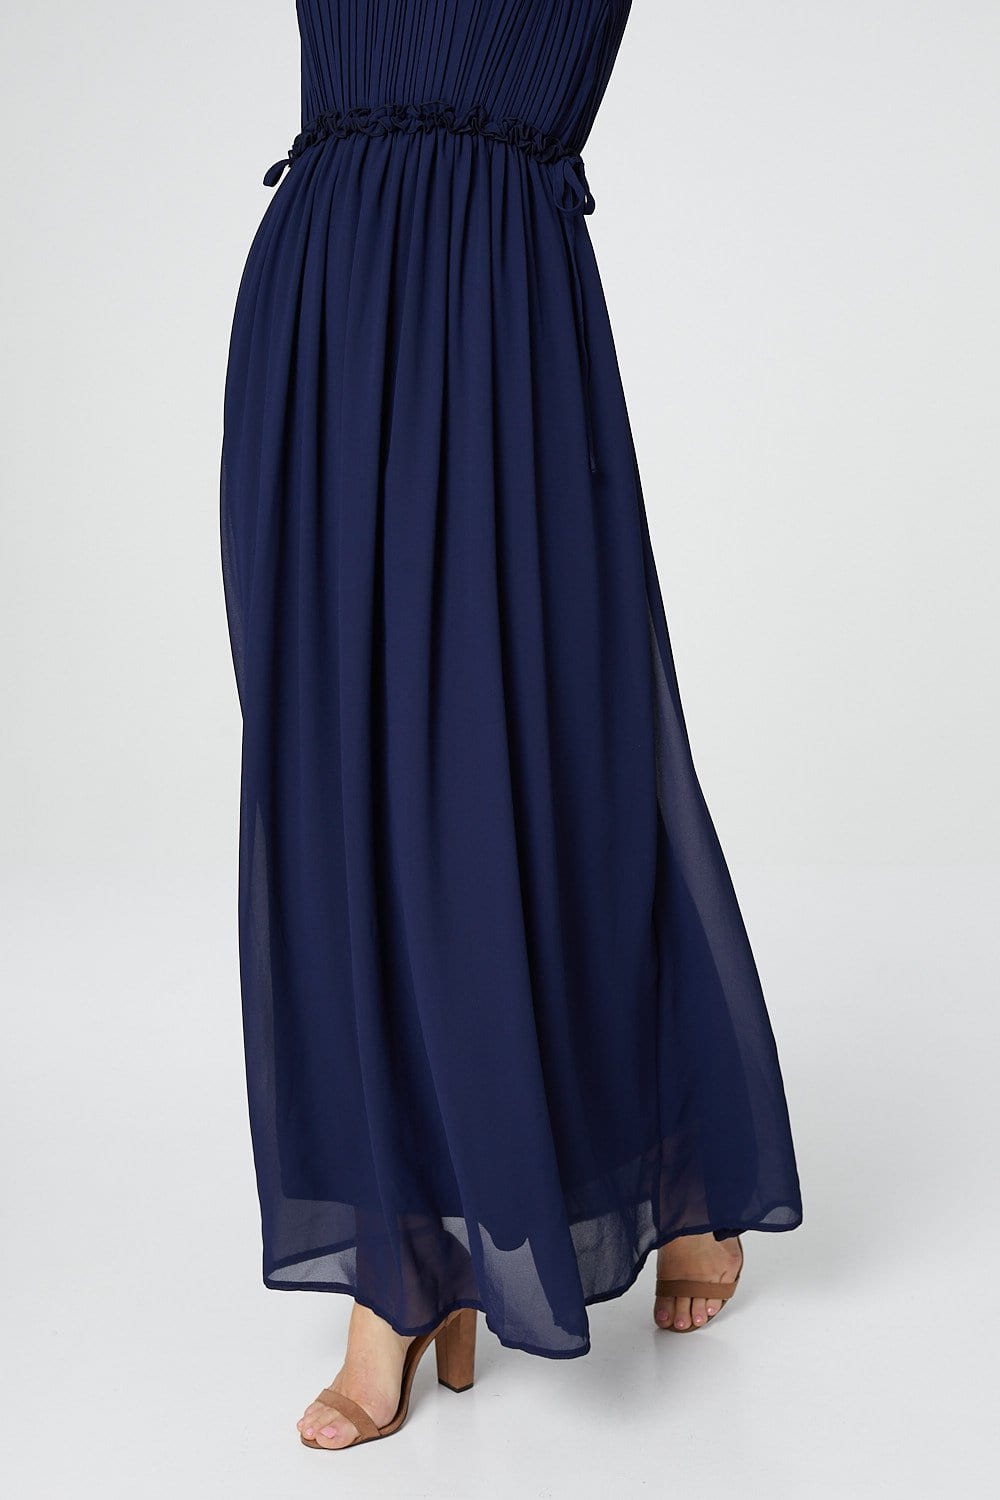 Navy | Ruched Bodice Maxi Dress